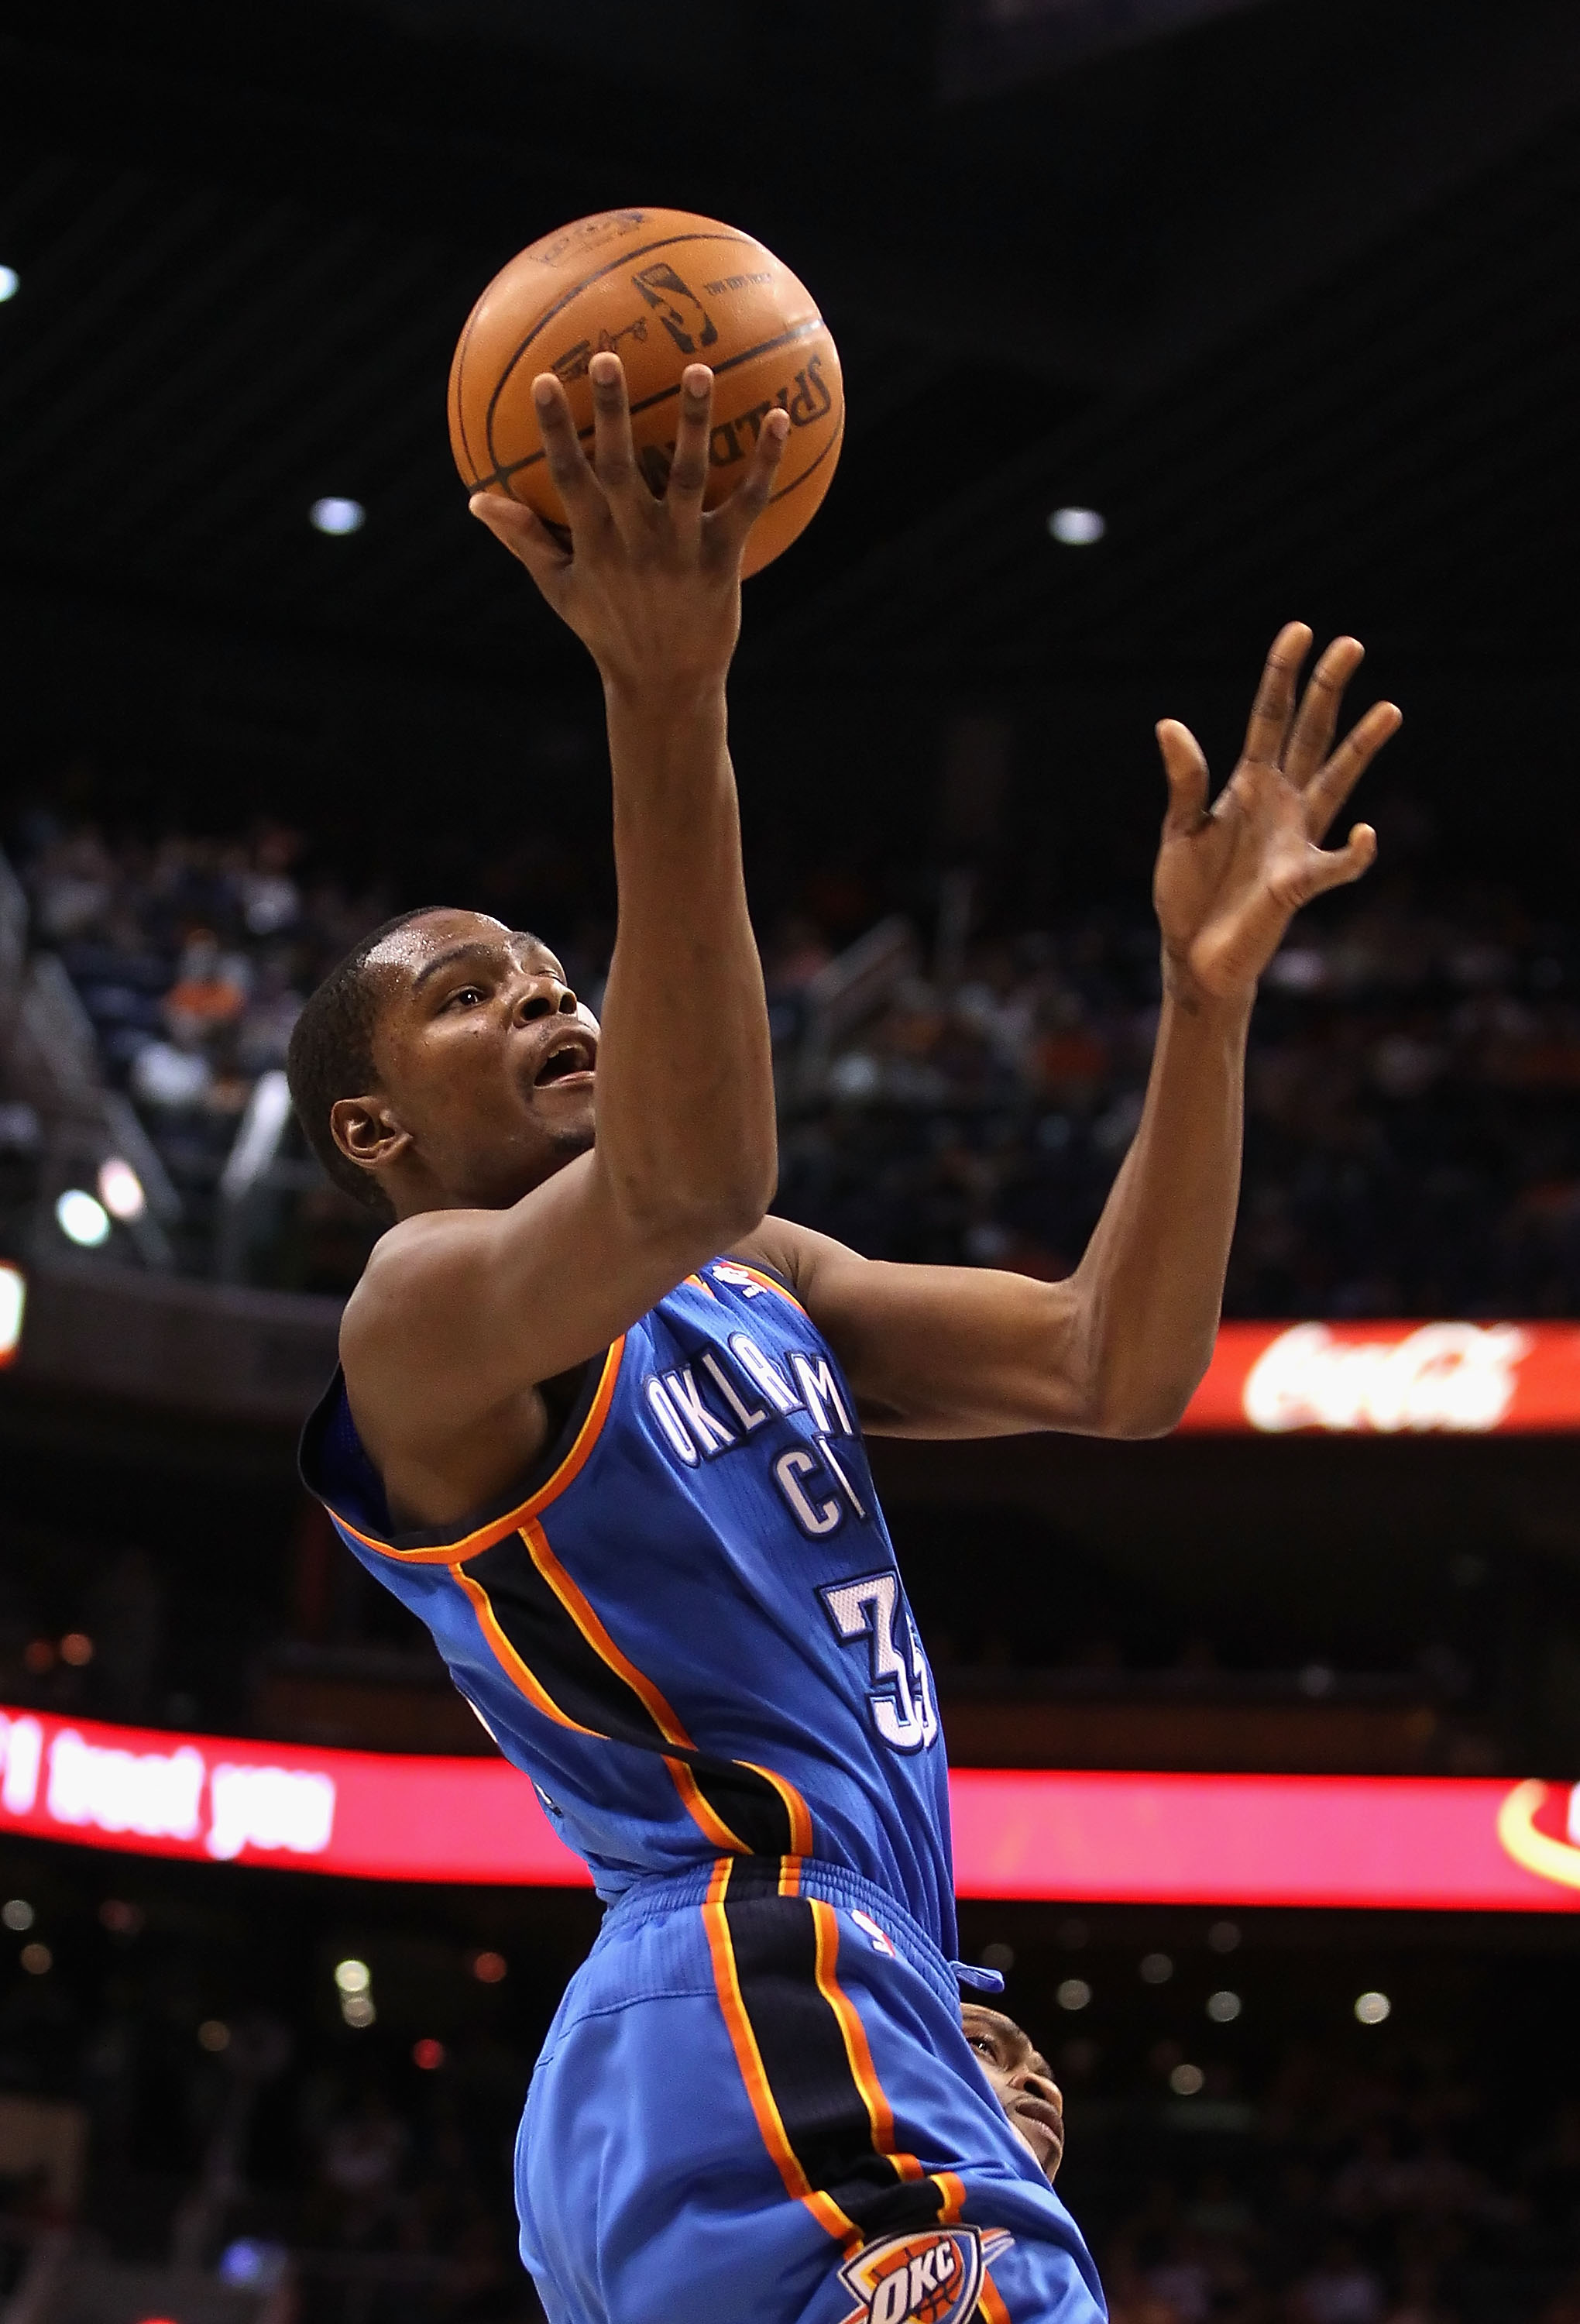 PHOENIX, AZ - MARCH 30:  Kevin Durant #35 of the Oklahoma City Thunder puts up a shot during the NBA game against the Phoenix Suns at US Airways Center on March 30, 2011 in Phoenix, Arizona. The Thunder defeated the Suns 116-98.   NOTE TO USER: User expre